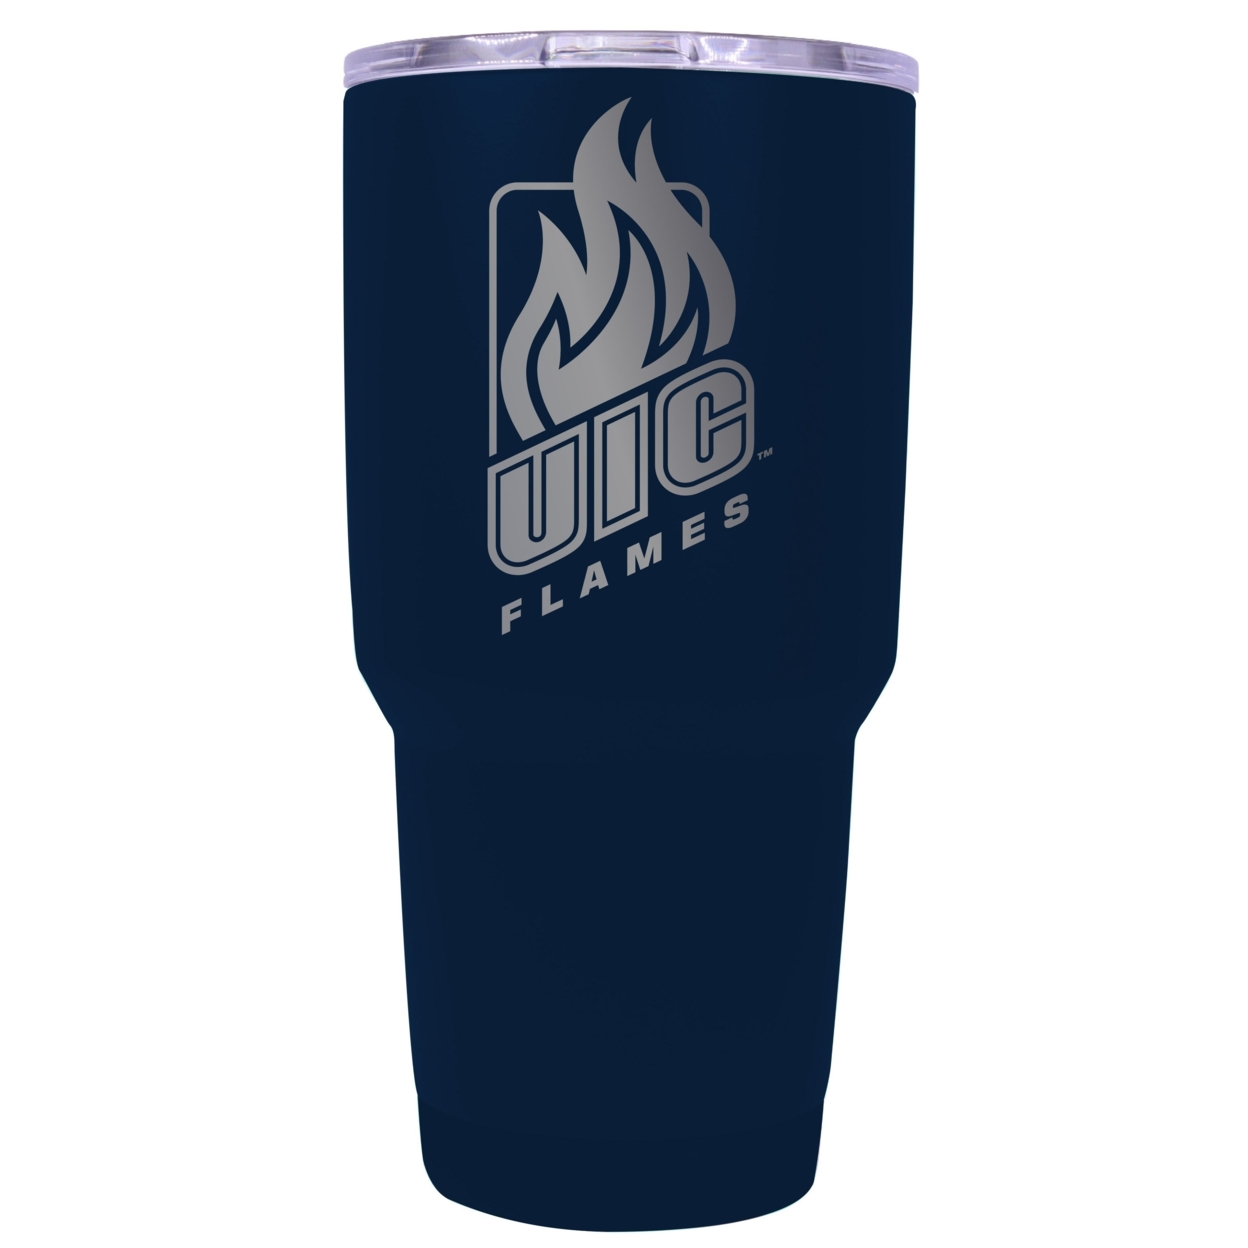 University Of Illinois At Chicago 24 Oz Laser Engraved Stainless Steel Insulated Tumbler - Choose Your Color. - Seafoam